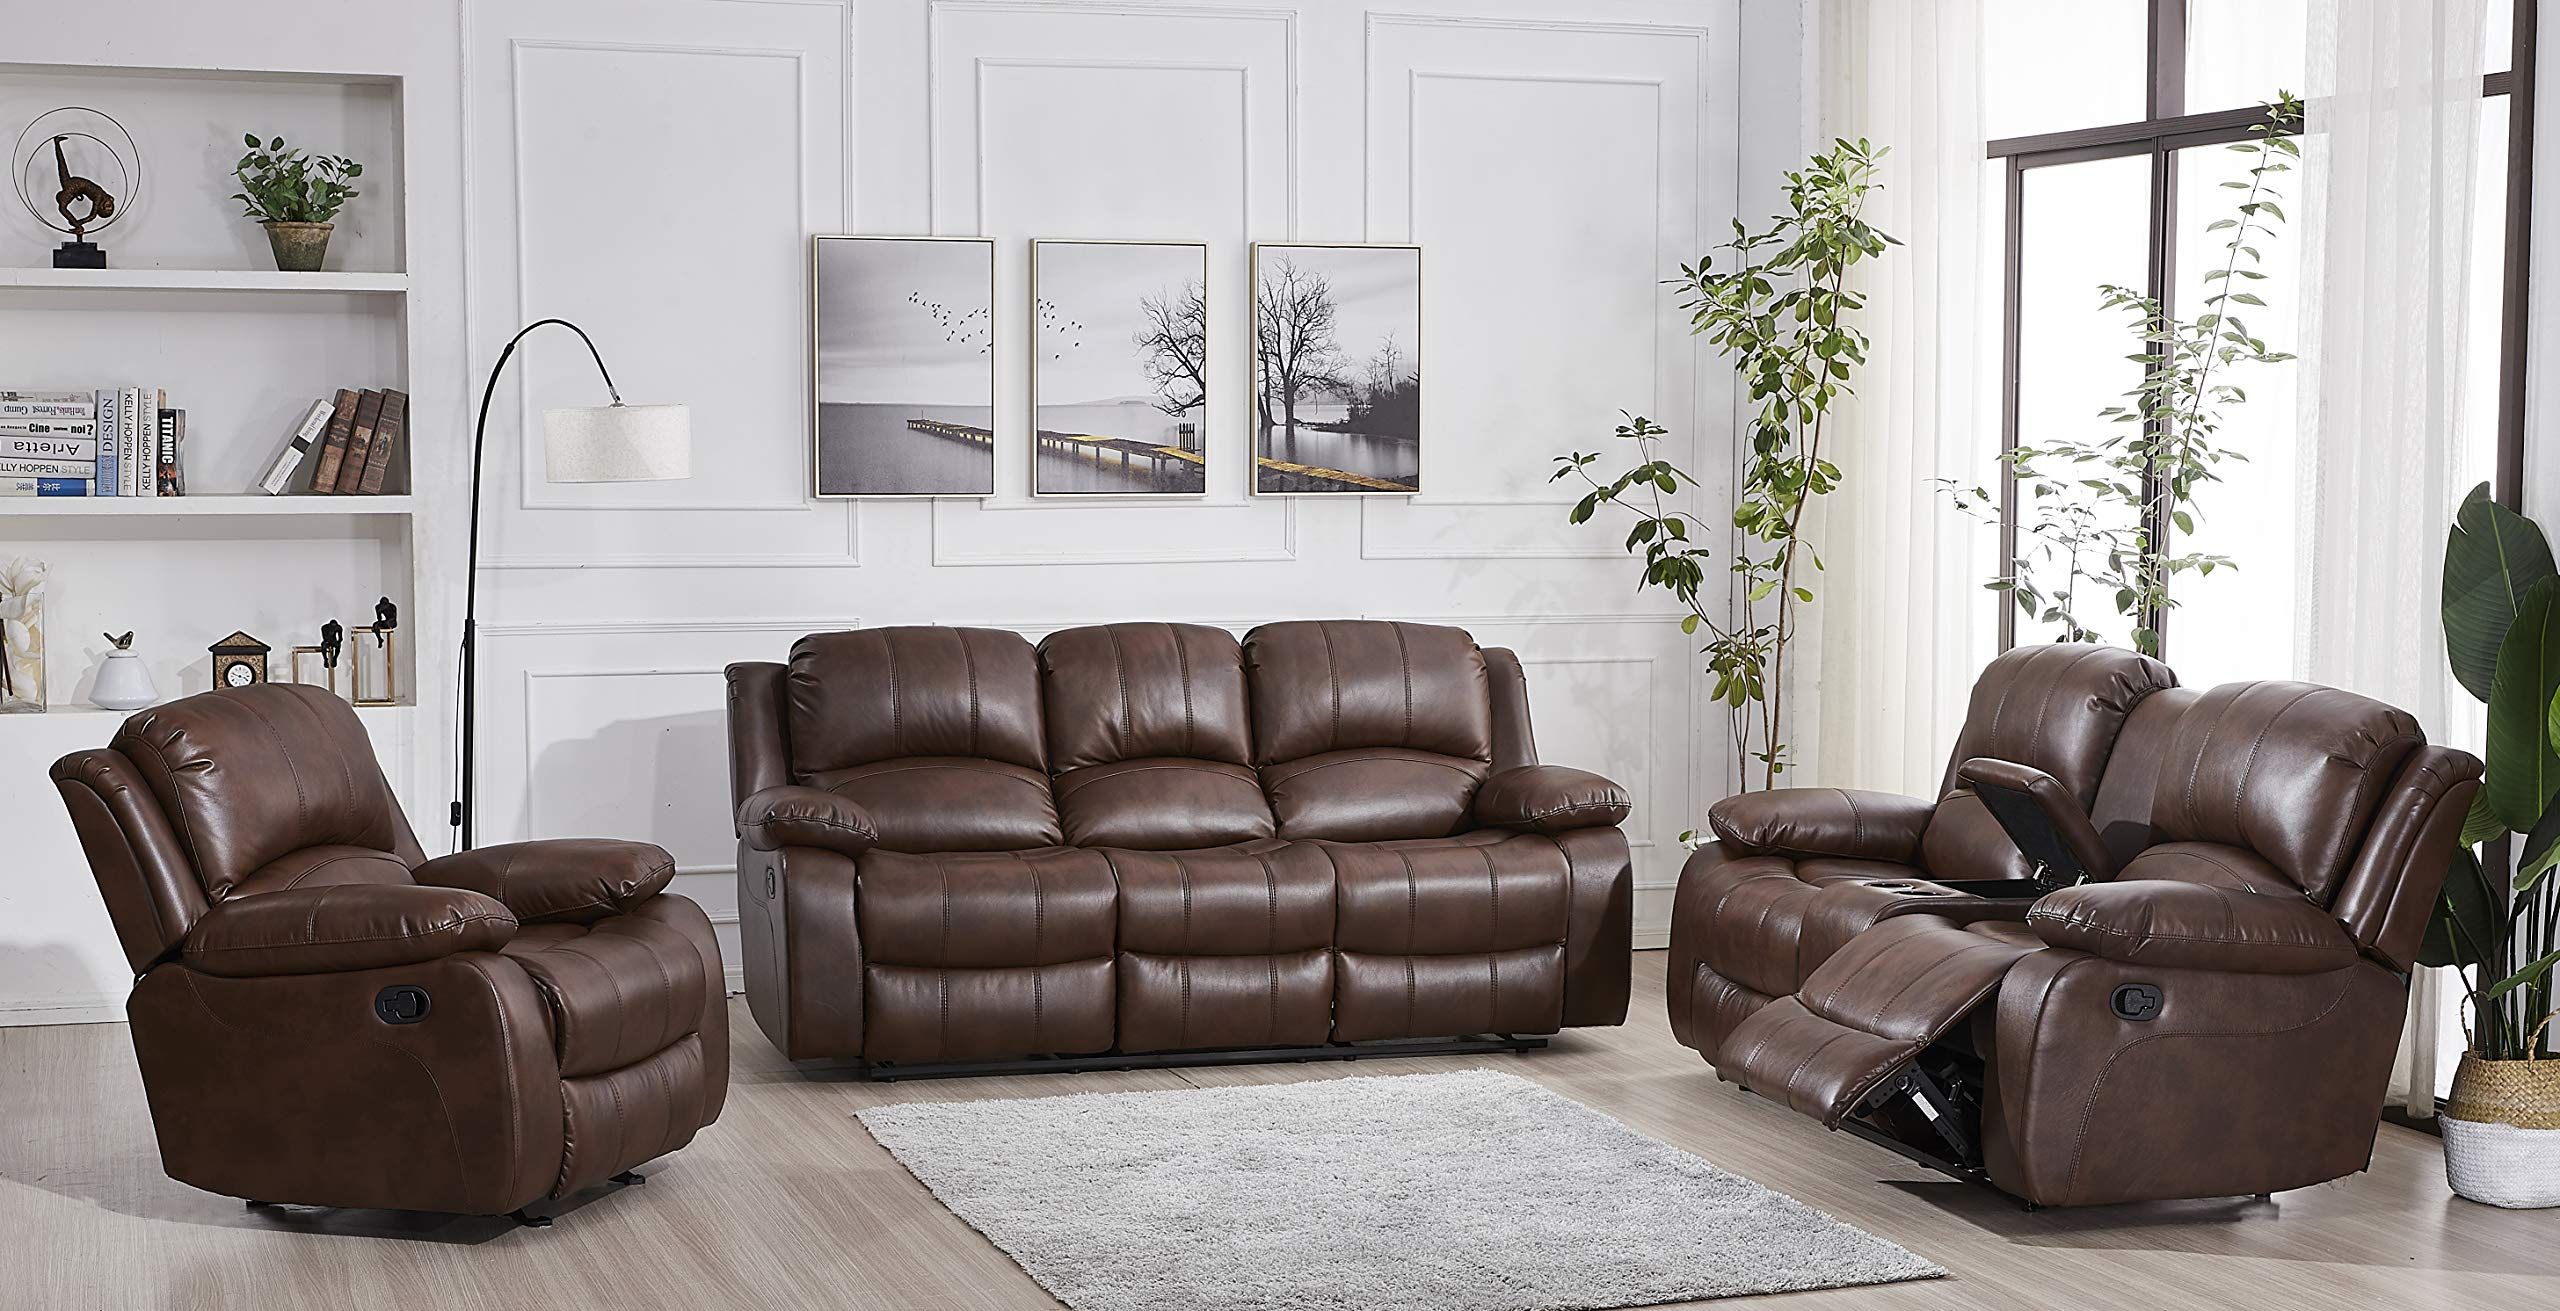 The Ultimate Comfort: Exploring the Beauty of Leather Recliner Sofa Sets